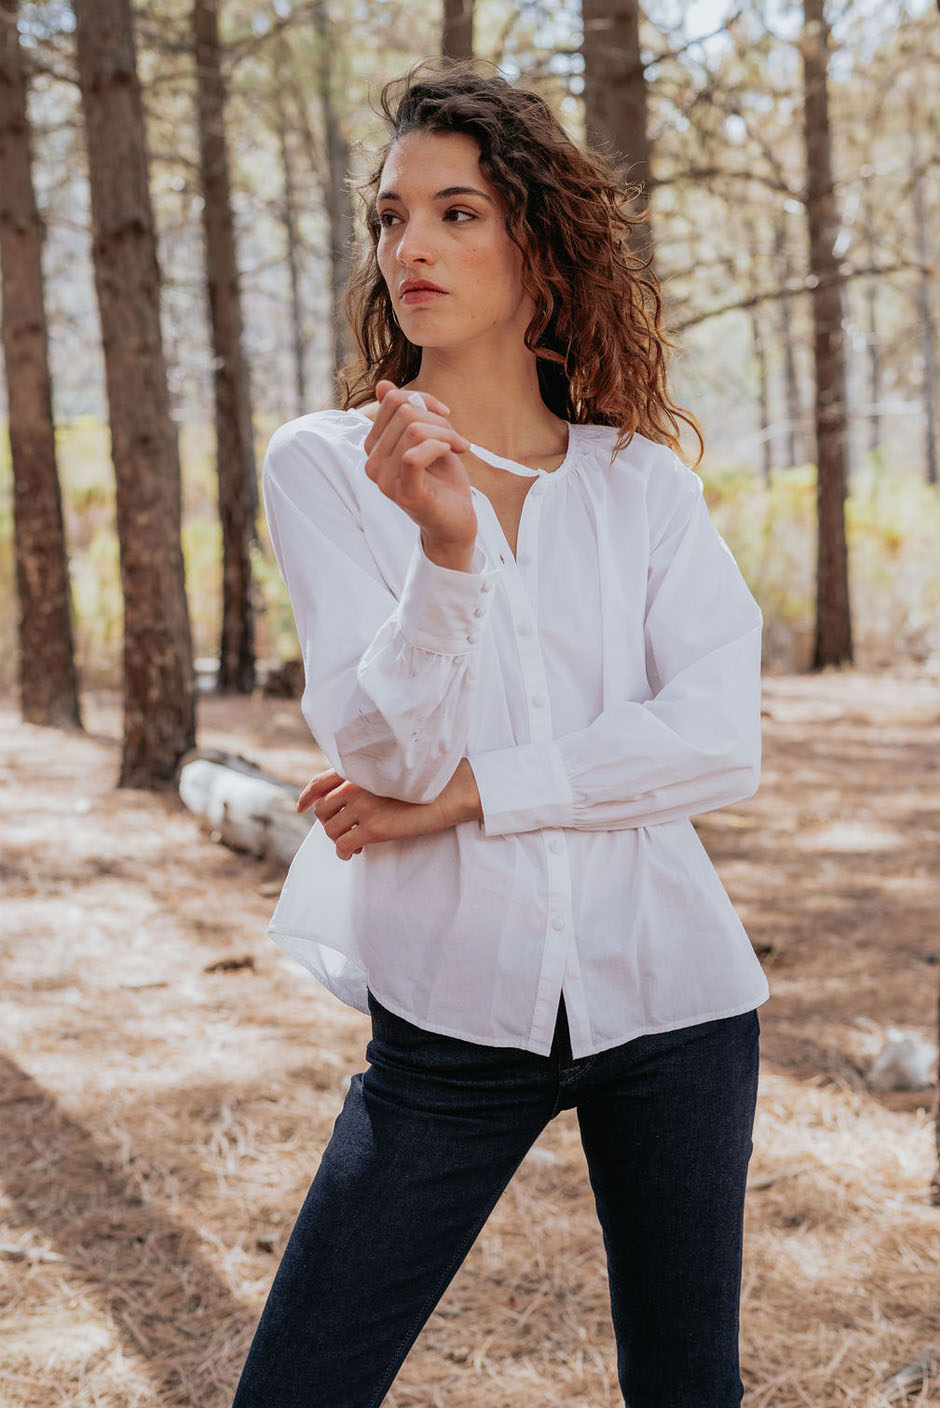 Mesa blouse in cloud white color for women by Paneros Clothing. Handmade from sustainable deadstock cotton poplin fabric, button-up with full sleeves, tie neck, and slight shirttail. Front view.